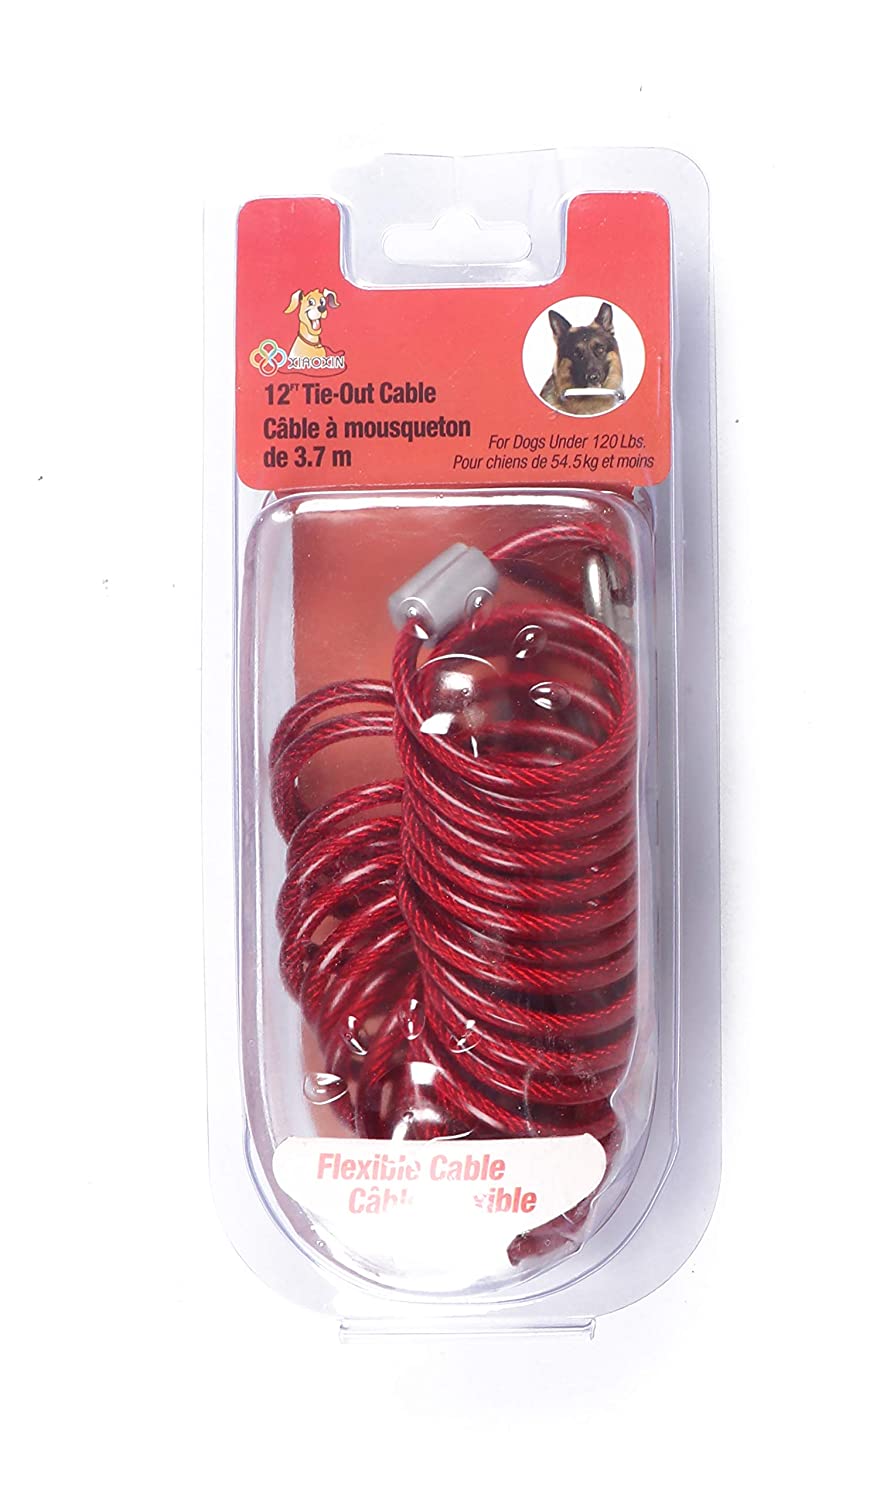 Relux Pet Dog Yard Stake Tie Out Cable 16 ft for Outdoor Yard and Camping,Medium to Large Dogs Up to 125 lbs Red,18 Stake, 16 ft Cable 